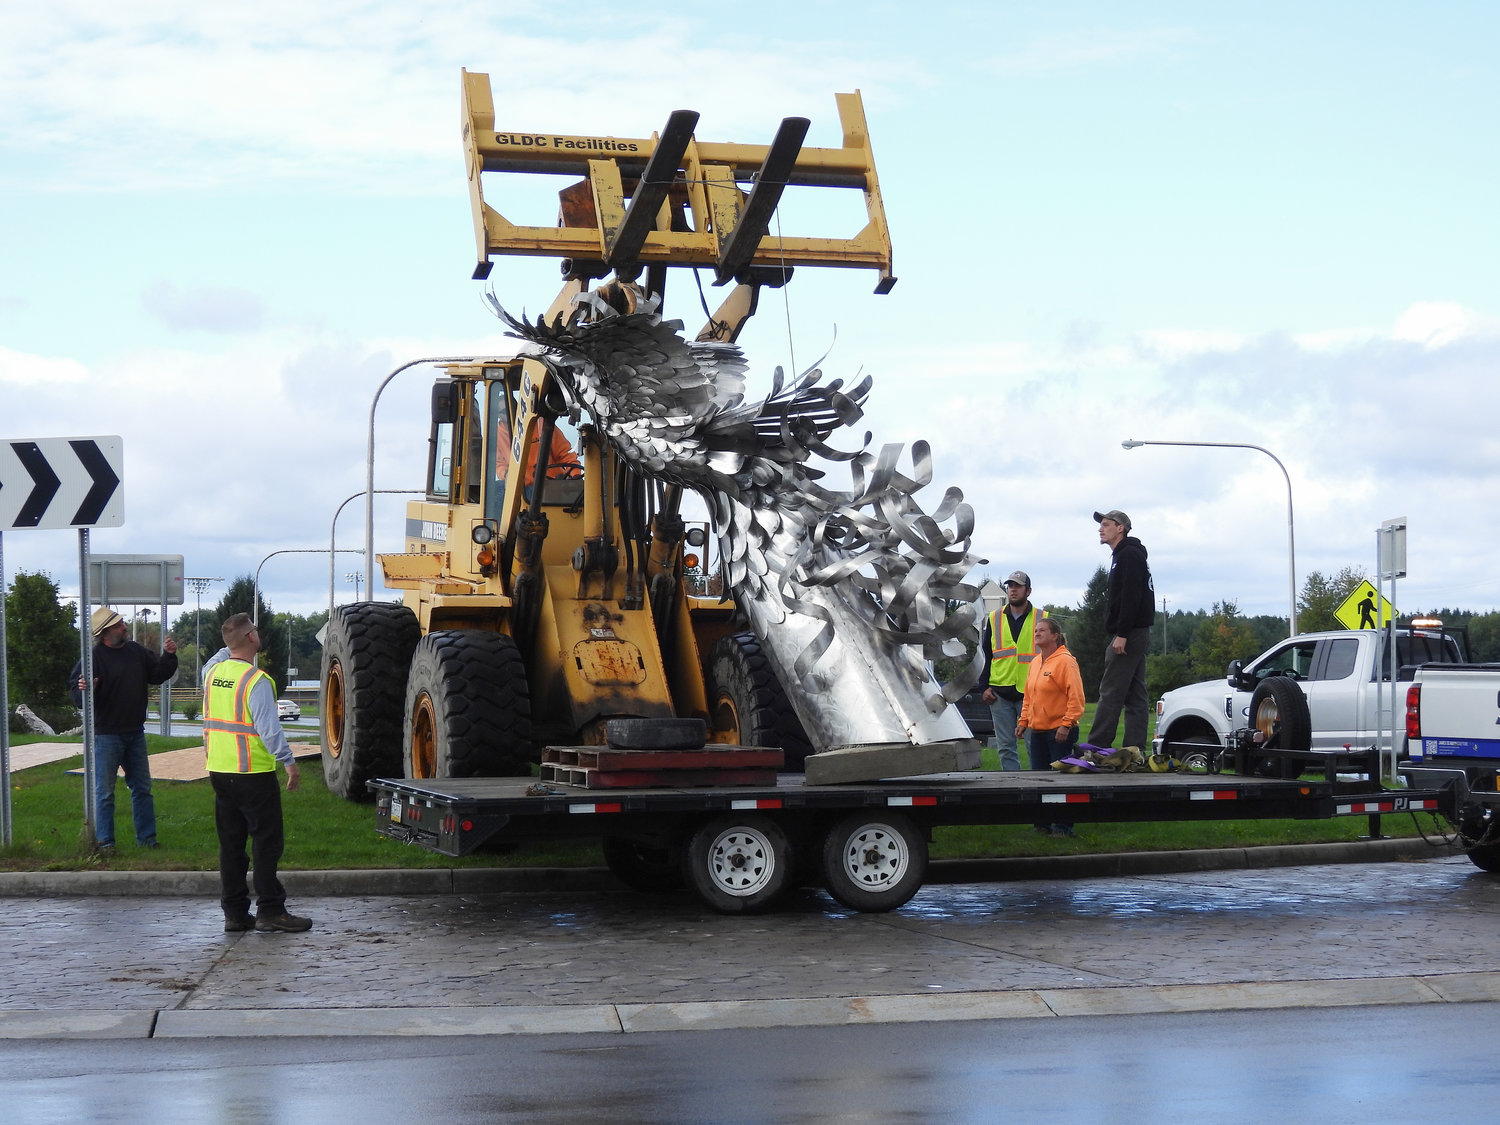 "The Phoenix" by James 'Jay' Seaman rises and goes up for installation at the Hangar Road roundabout in the Griffiss Business & Technology Park on Wednesday, Sept